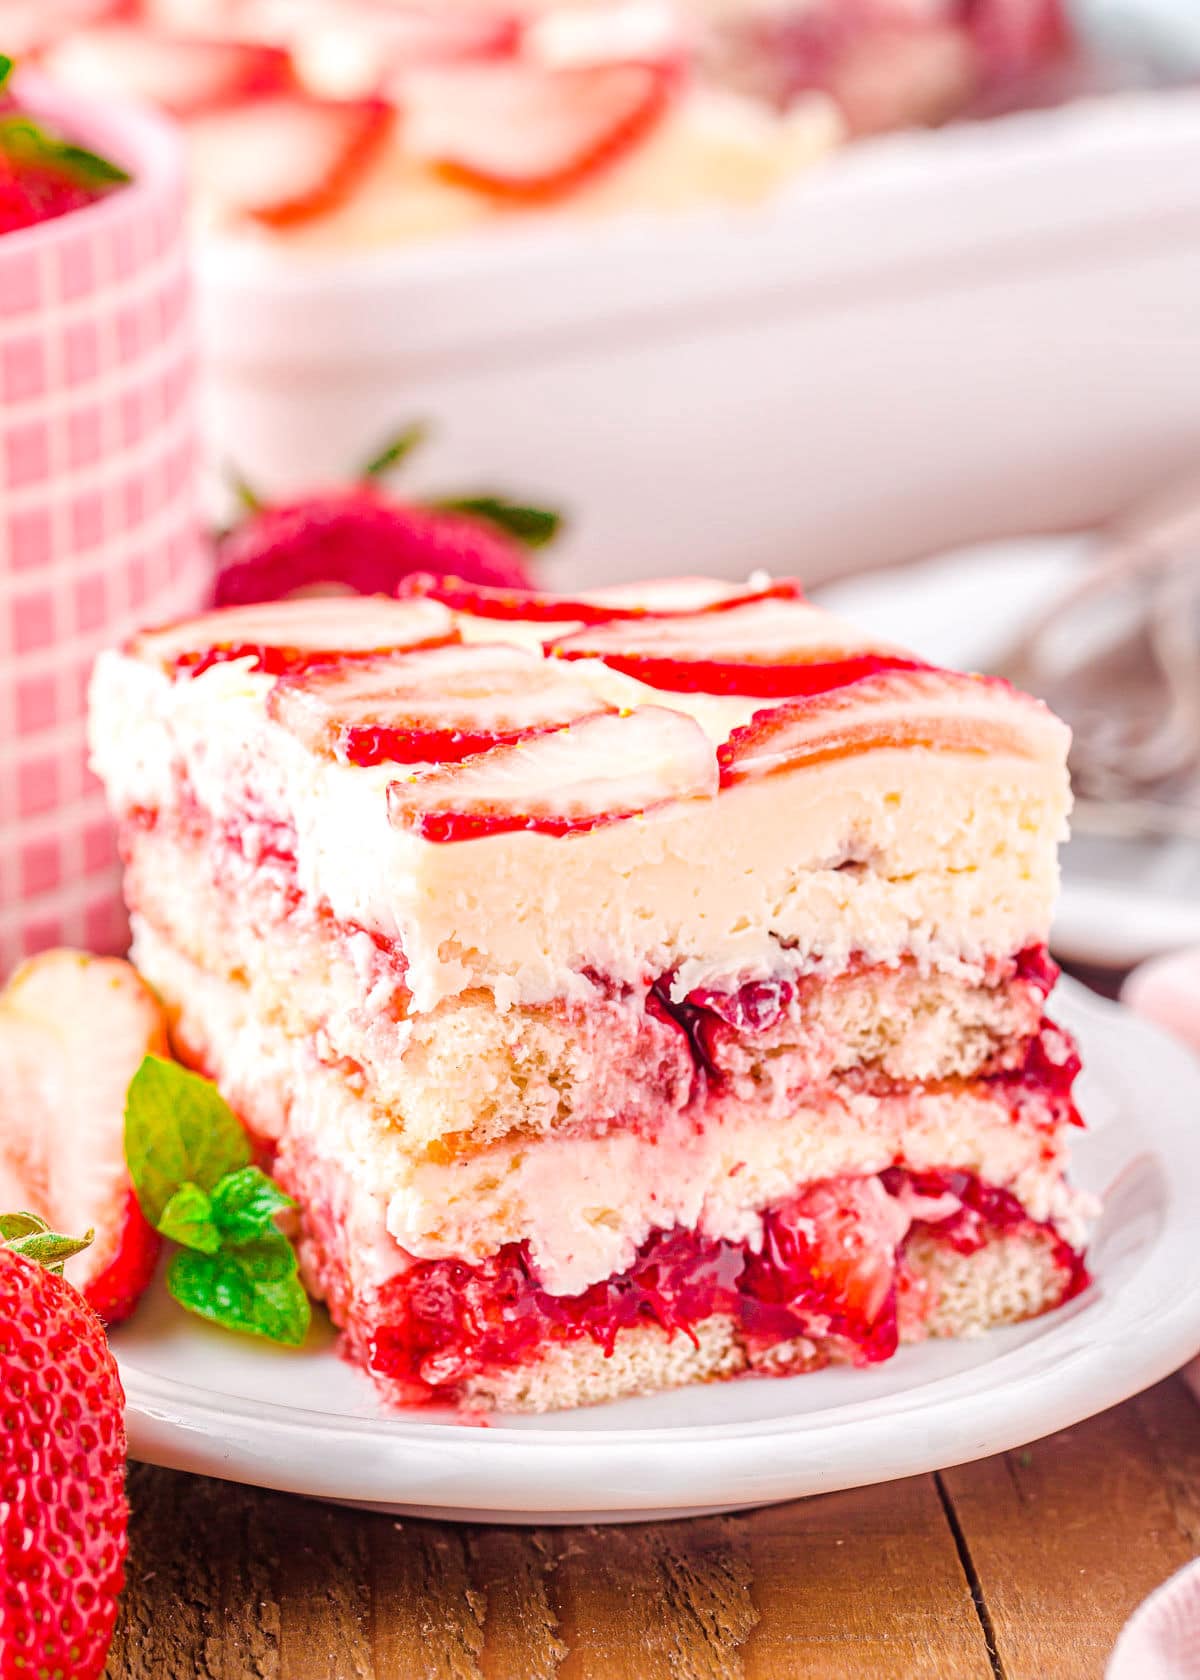 piece of strawberry tiramisu in a white plate with fresh strawberries on top and around the plate.